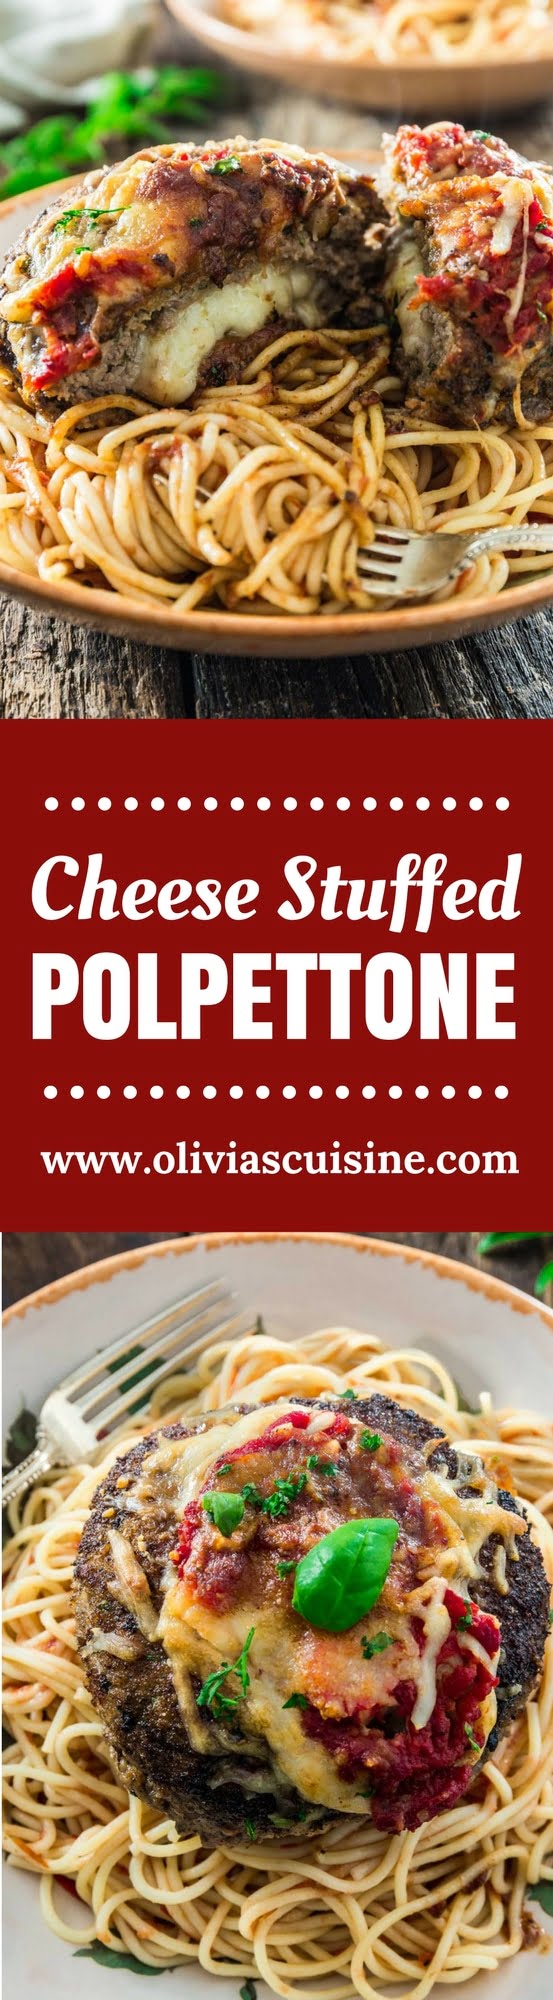 Cheese Stuffed Polpettone | www.oliviascuisine.com | I dare you to resist this Cheese Stuffed Polpettone: a giant and delicious Italian meatball, stuffed with mozzarella cheese, that is technically big enough to share. I say “technically”, because chances are the whole thing will be gone before anybody can ask for a bite! ;-)